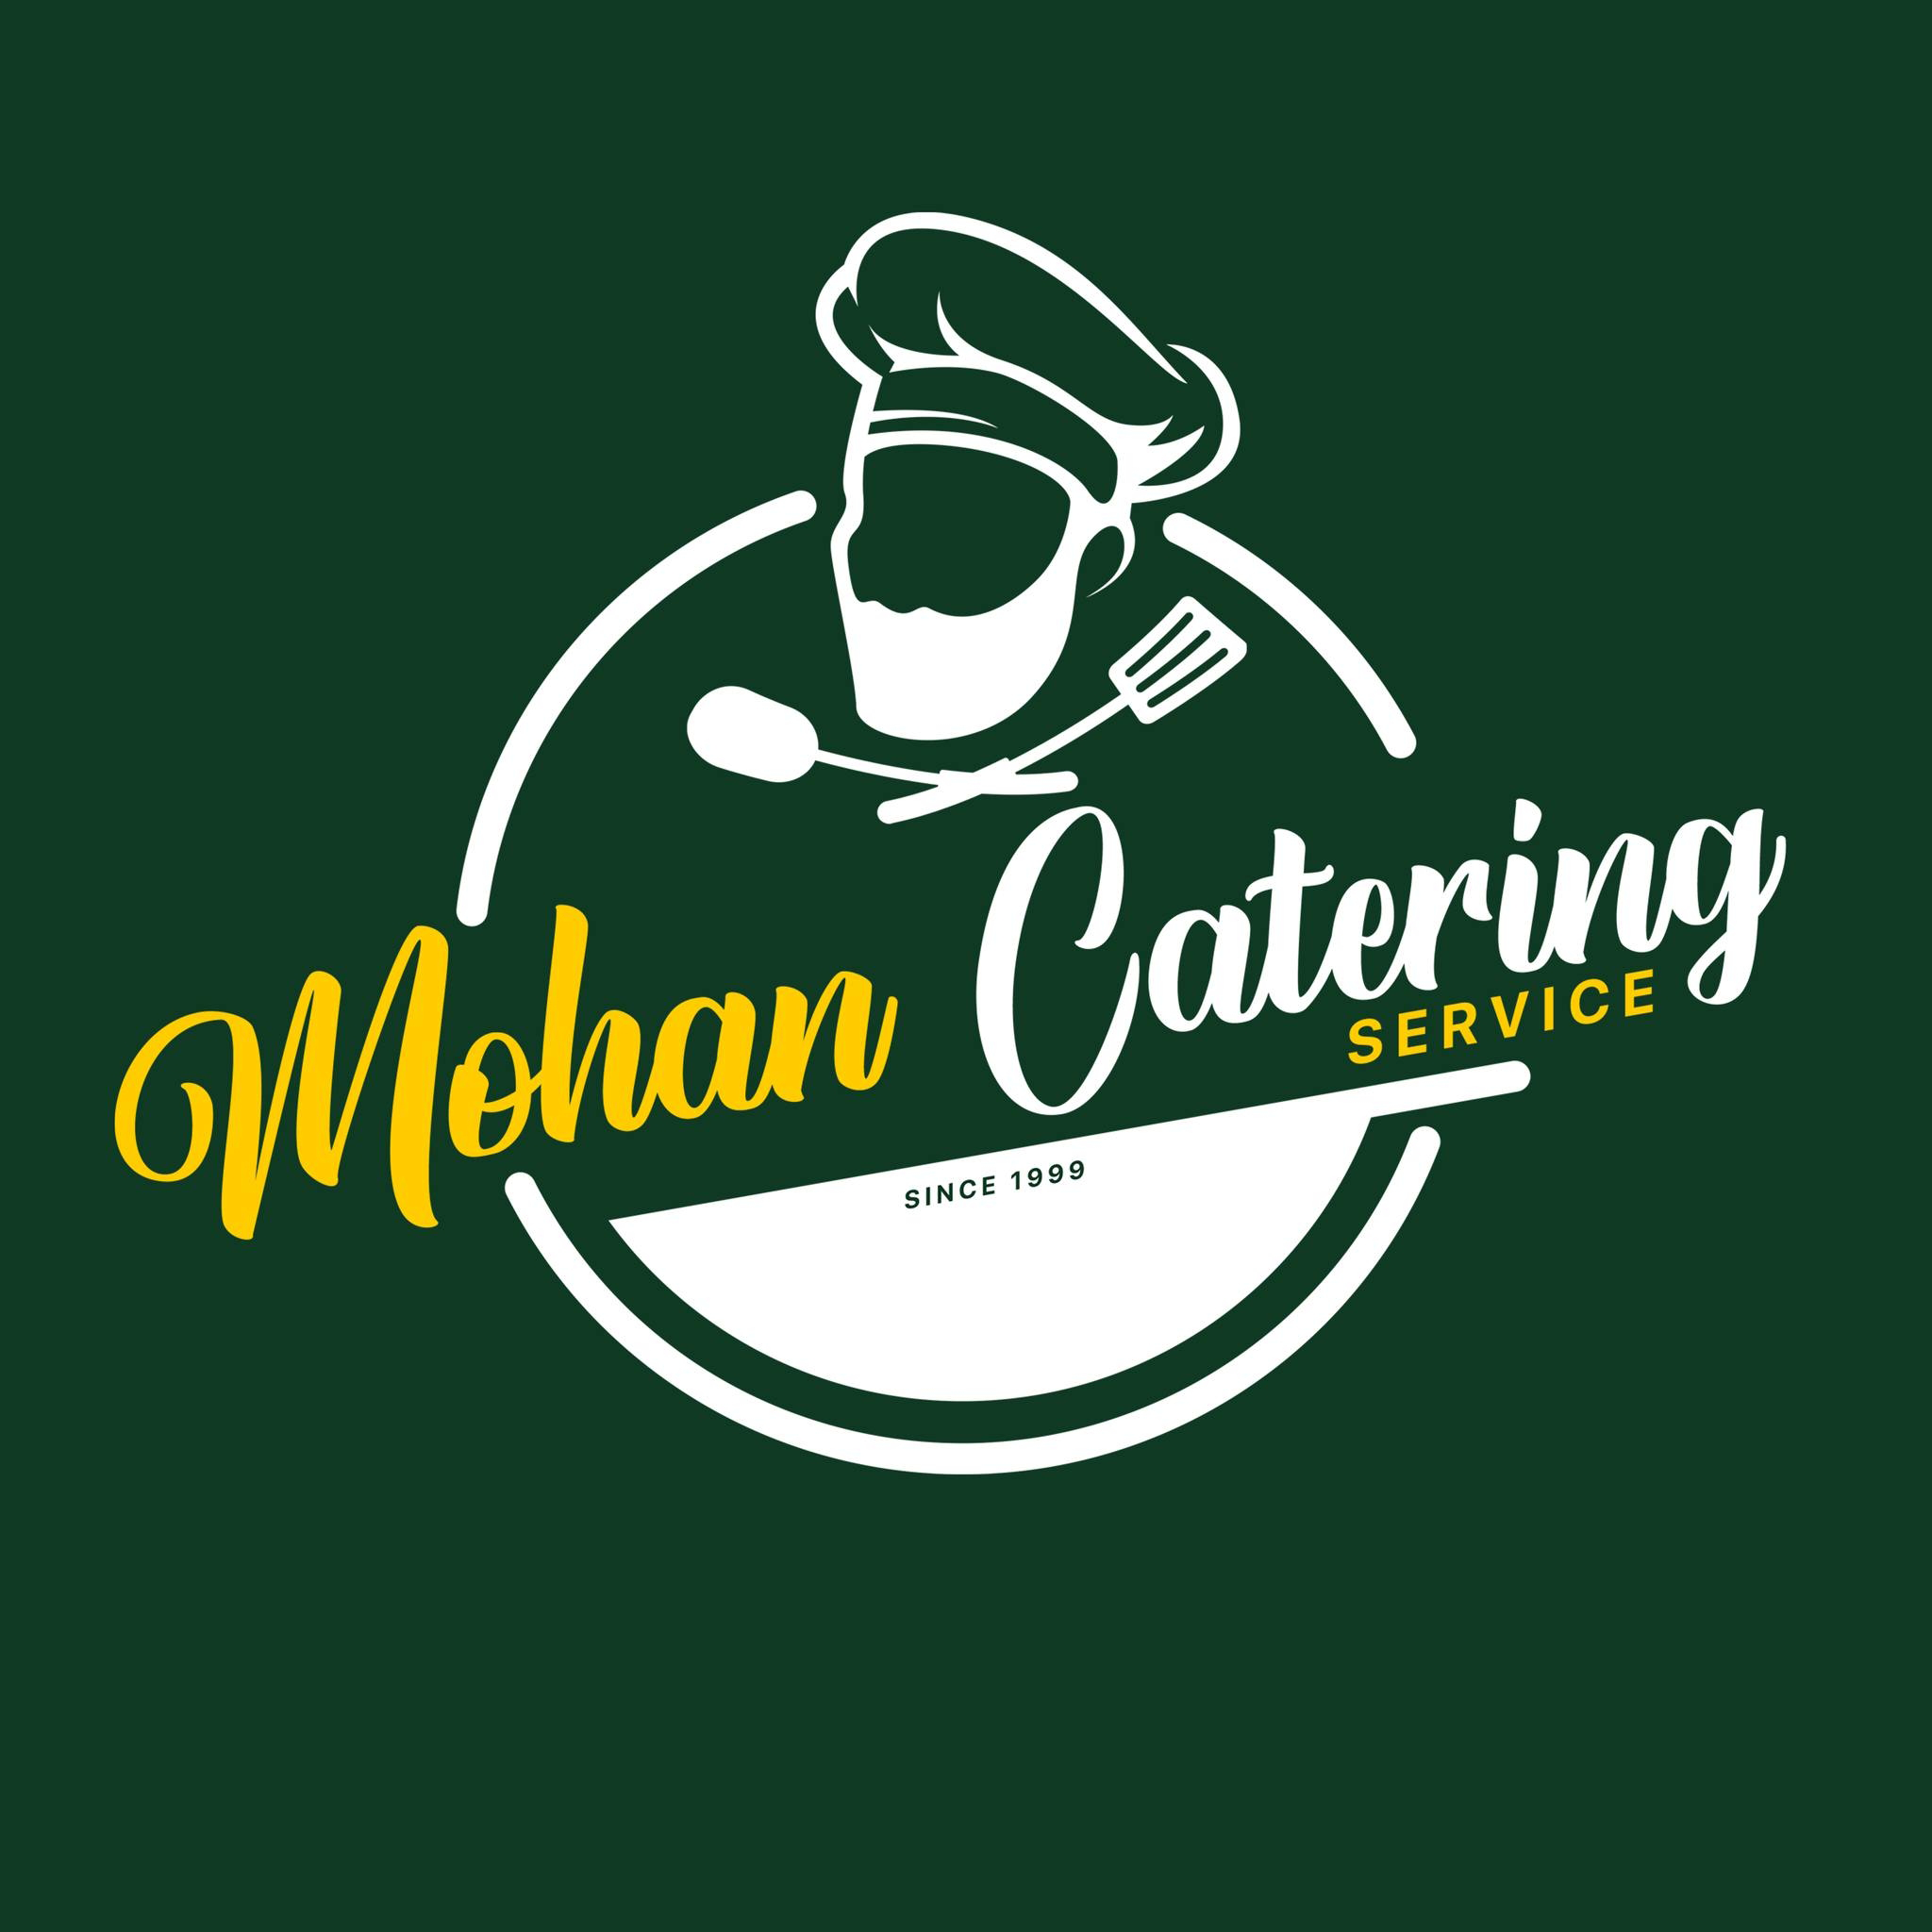 Mohan Catering Service